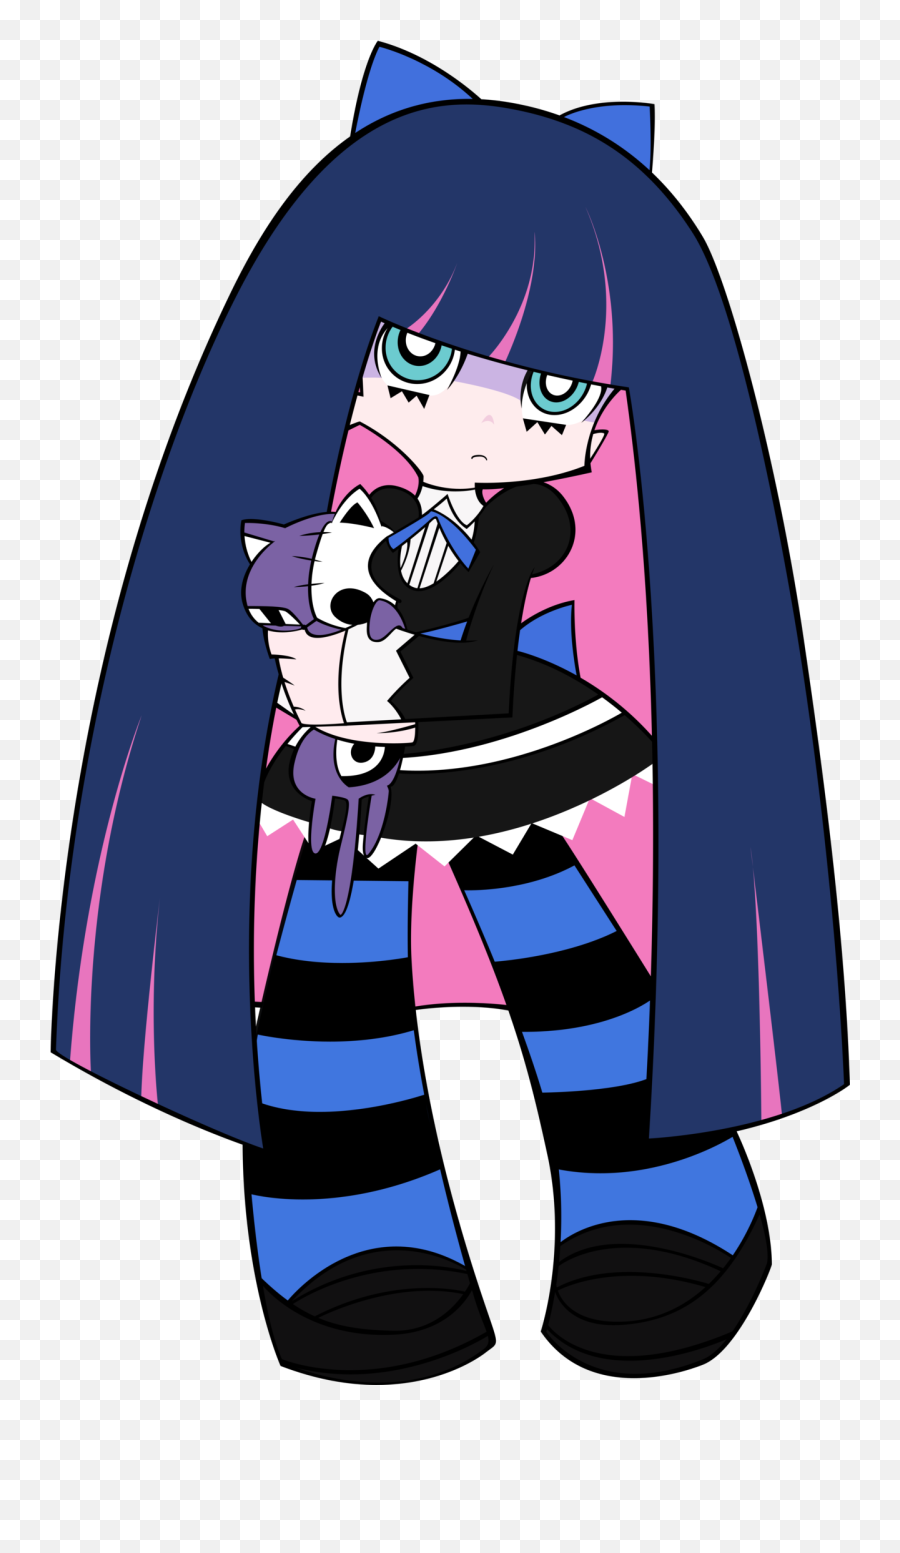 Stocking - Stocking Panty And Stocking Png,Stocking Png